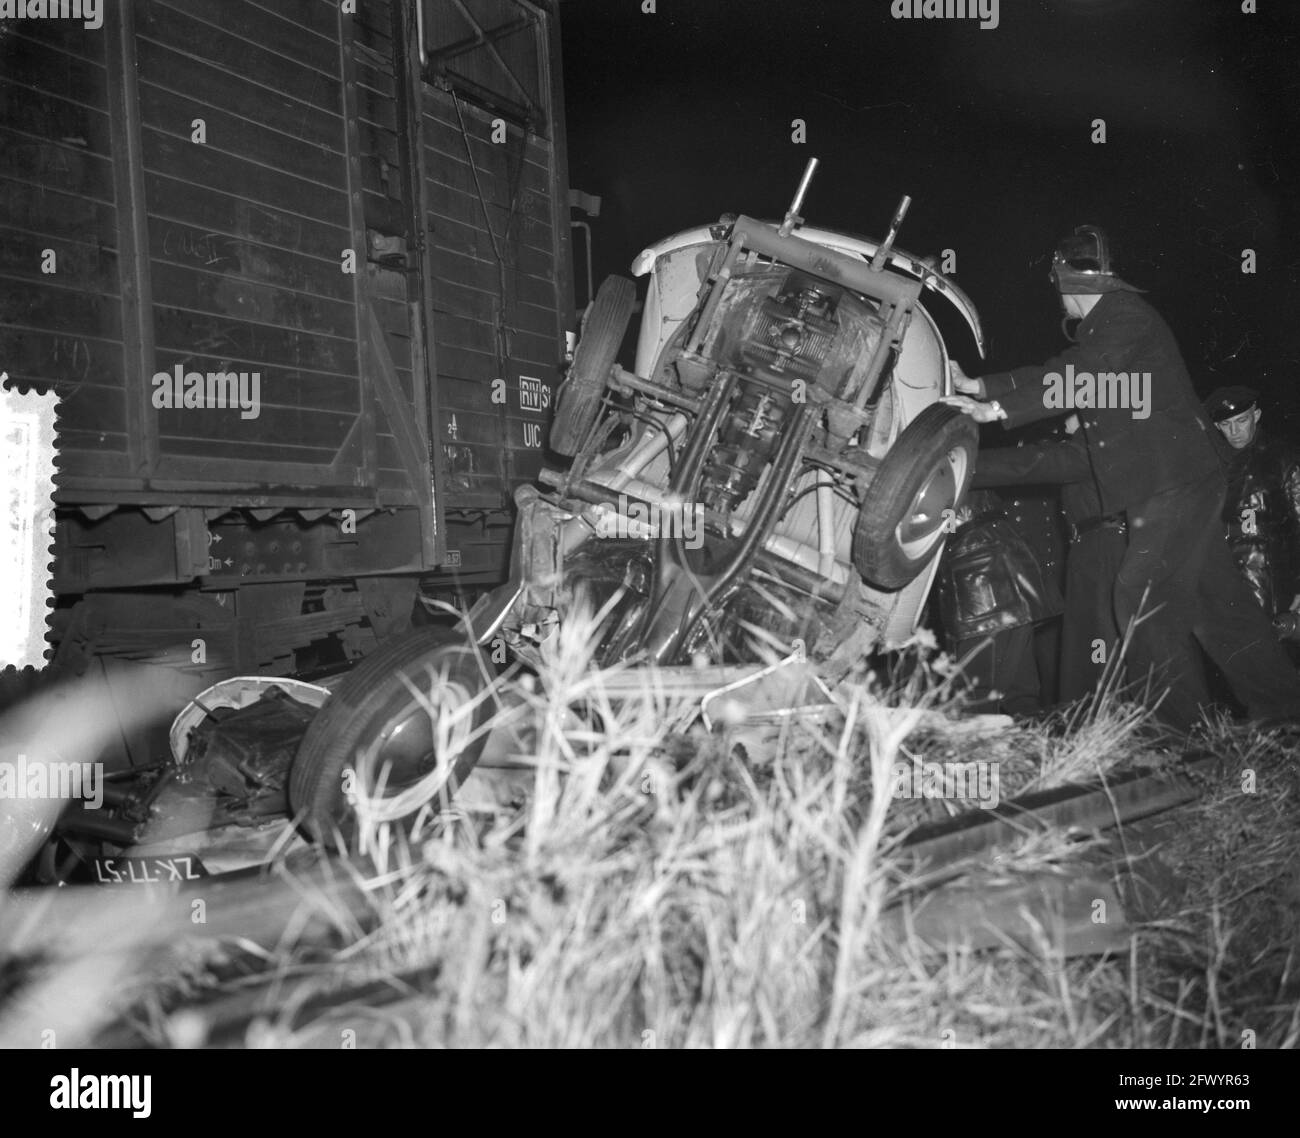 Auto-train accident Hemweg Amsterdam, November 16, 1959, Auto-train accidents, The Netherlands, 20th century press agency photo, news to remember, documentary, historic photography 1945-1990, visual stories, human history of the Twentieth Century, capturing moments in time Stock Photo